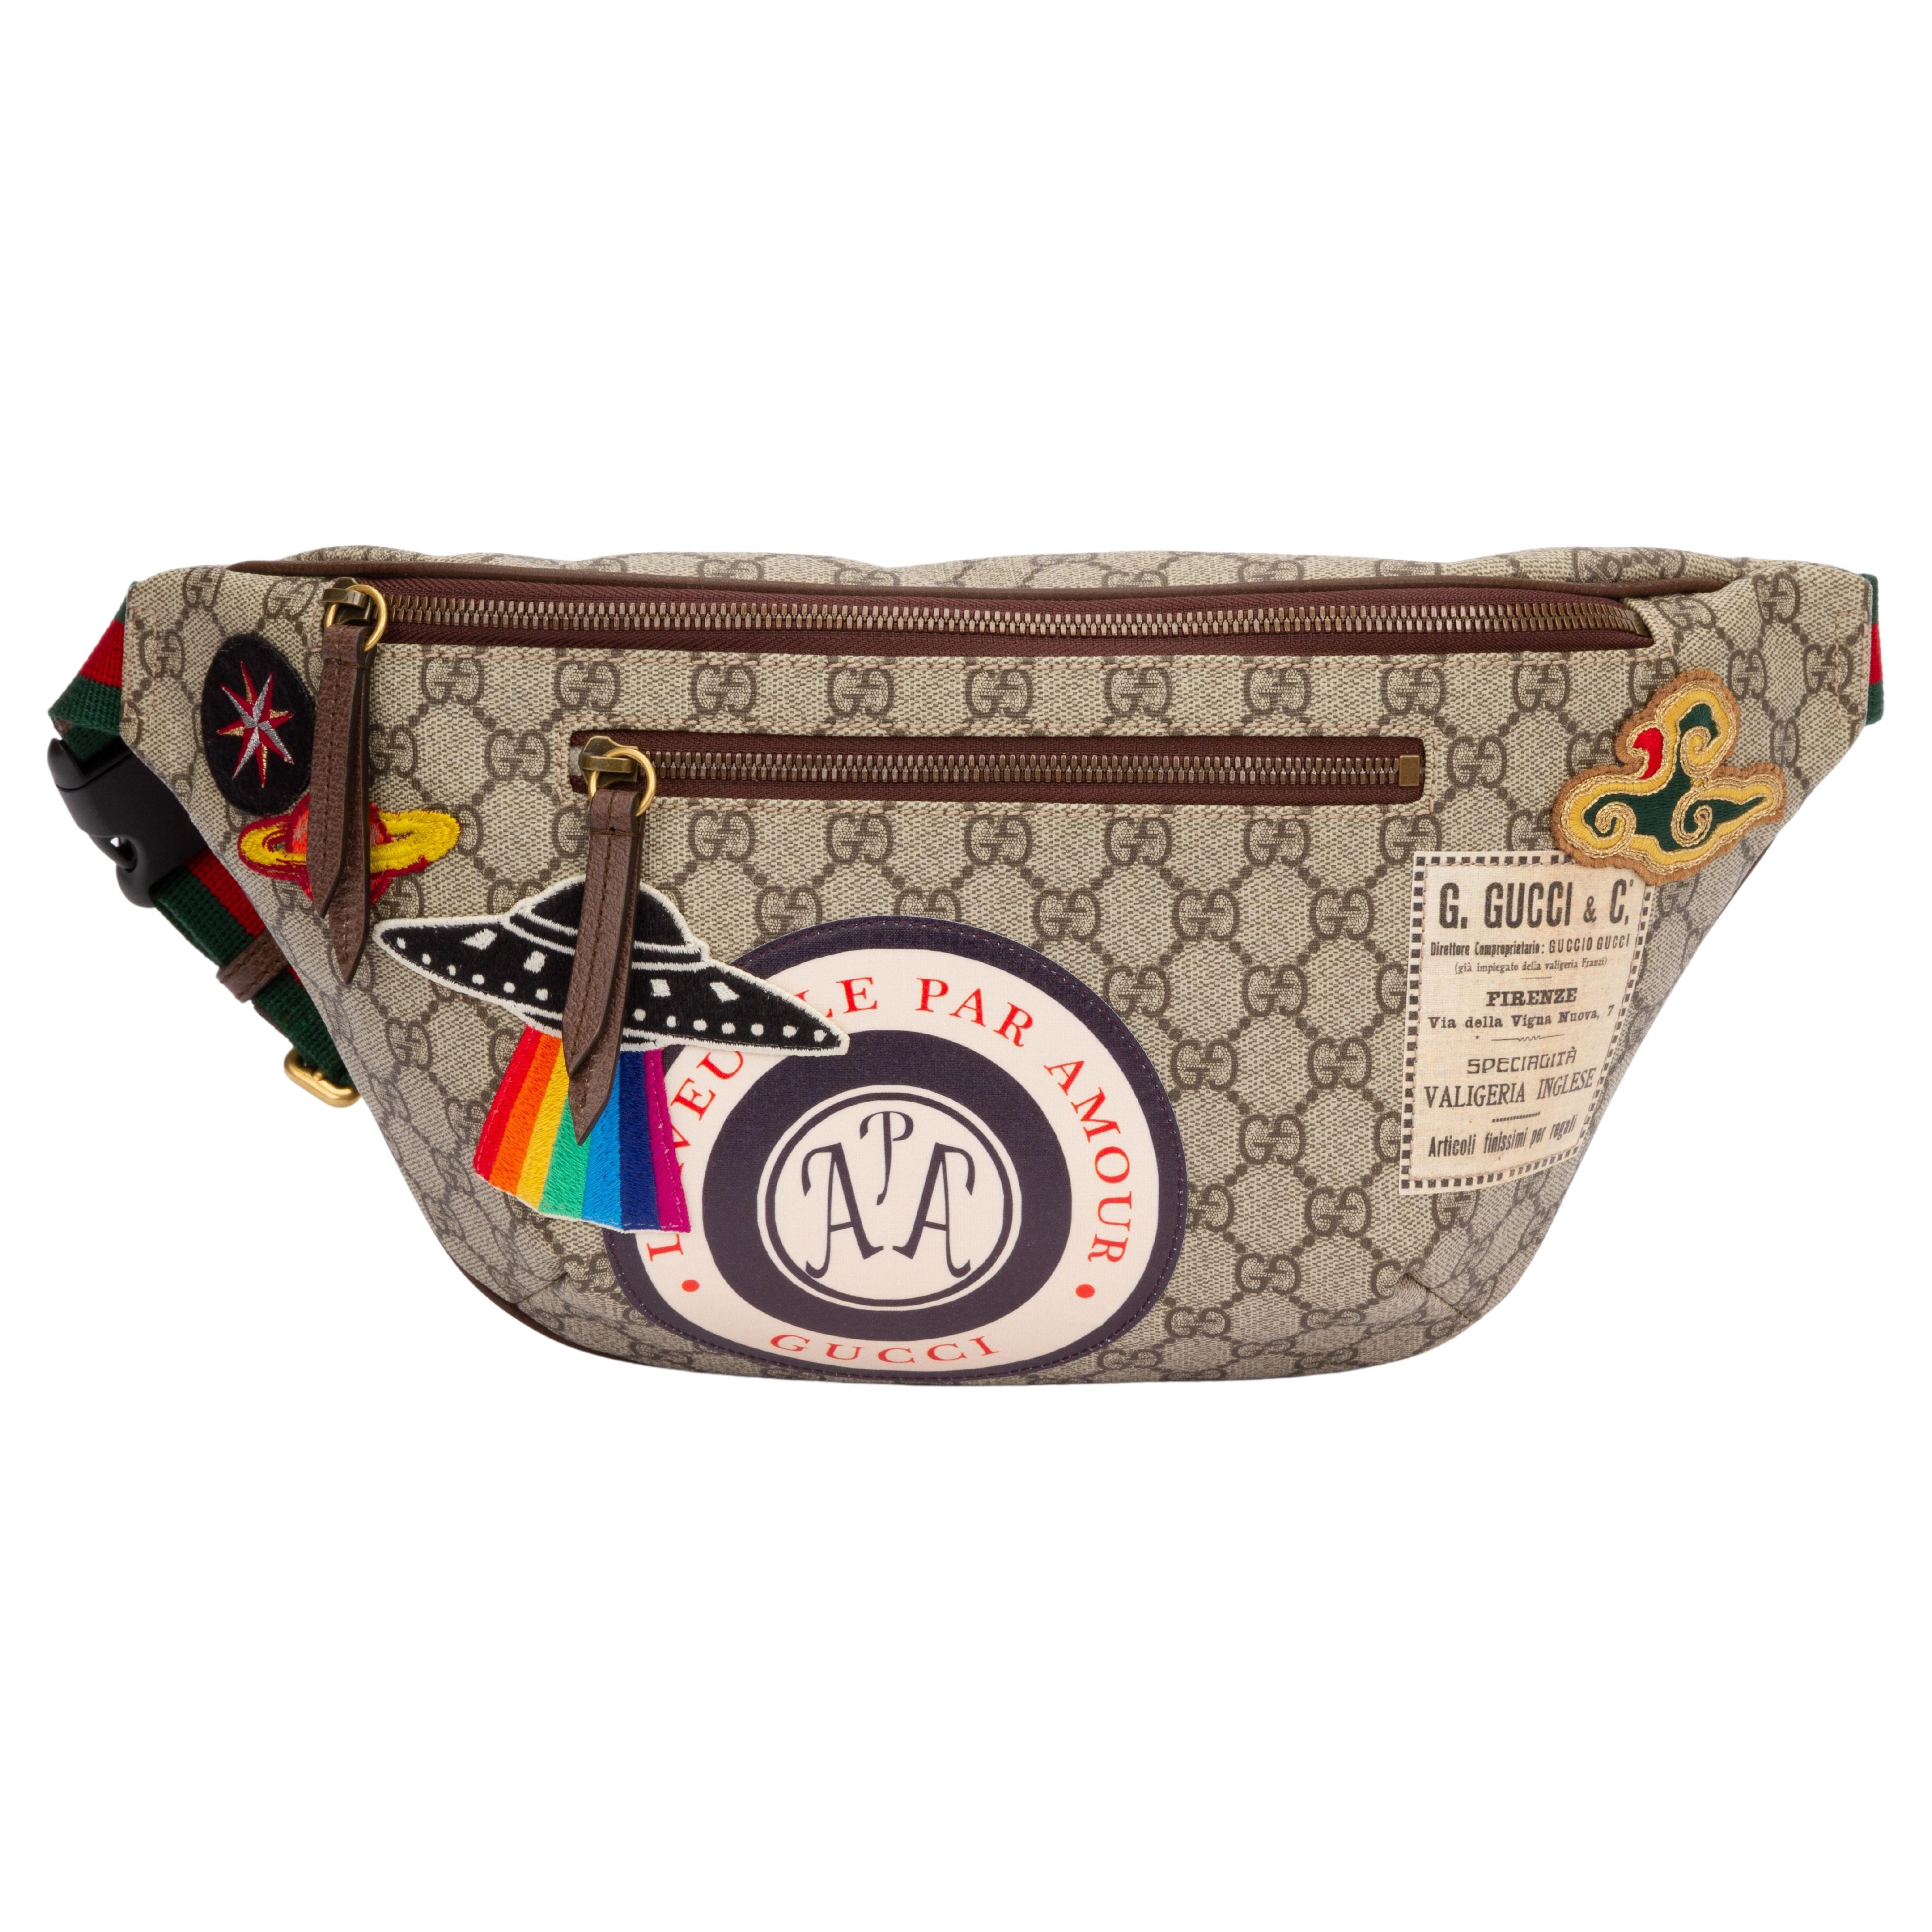 Gucci Fanny Pack - 29 For Sale on 1stDibs | gucci fanny pack women, gucci  fanny pack crossbody, gucci fannypack